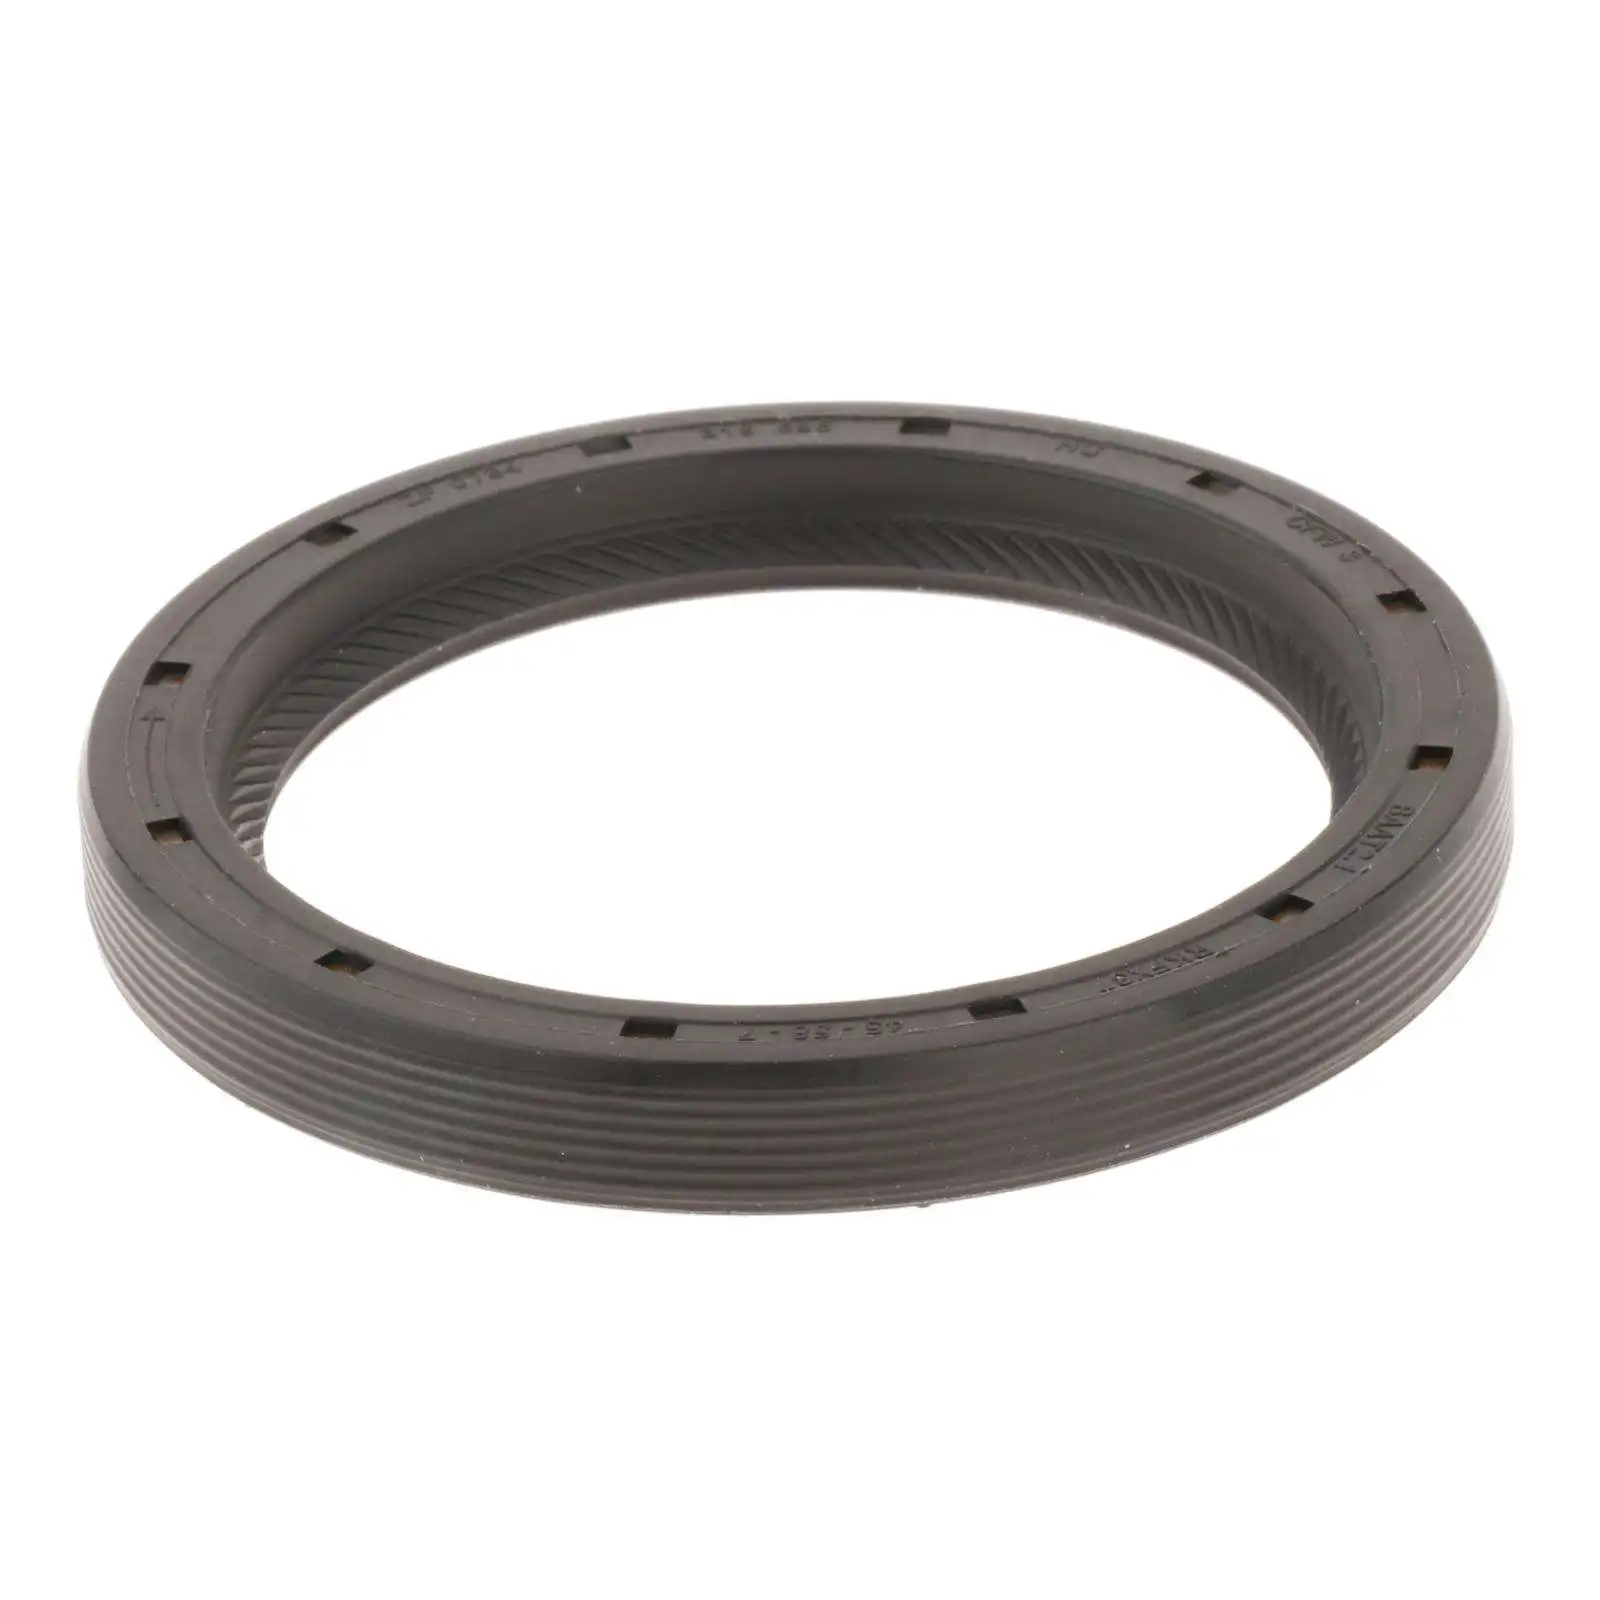 

6HP19 6HP26 Transmission Oil Seal fits for , Durable Premium Material